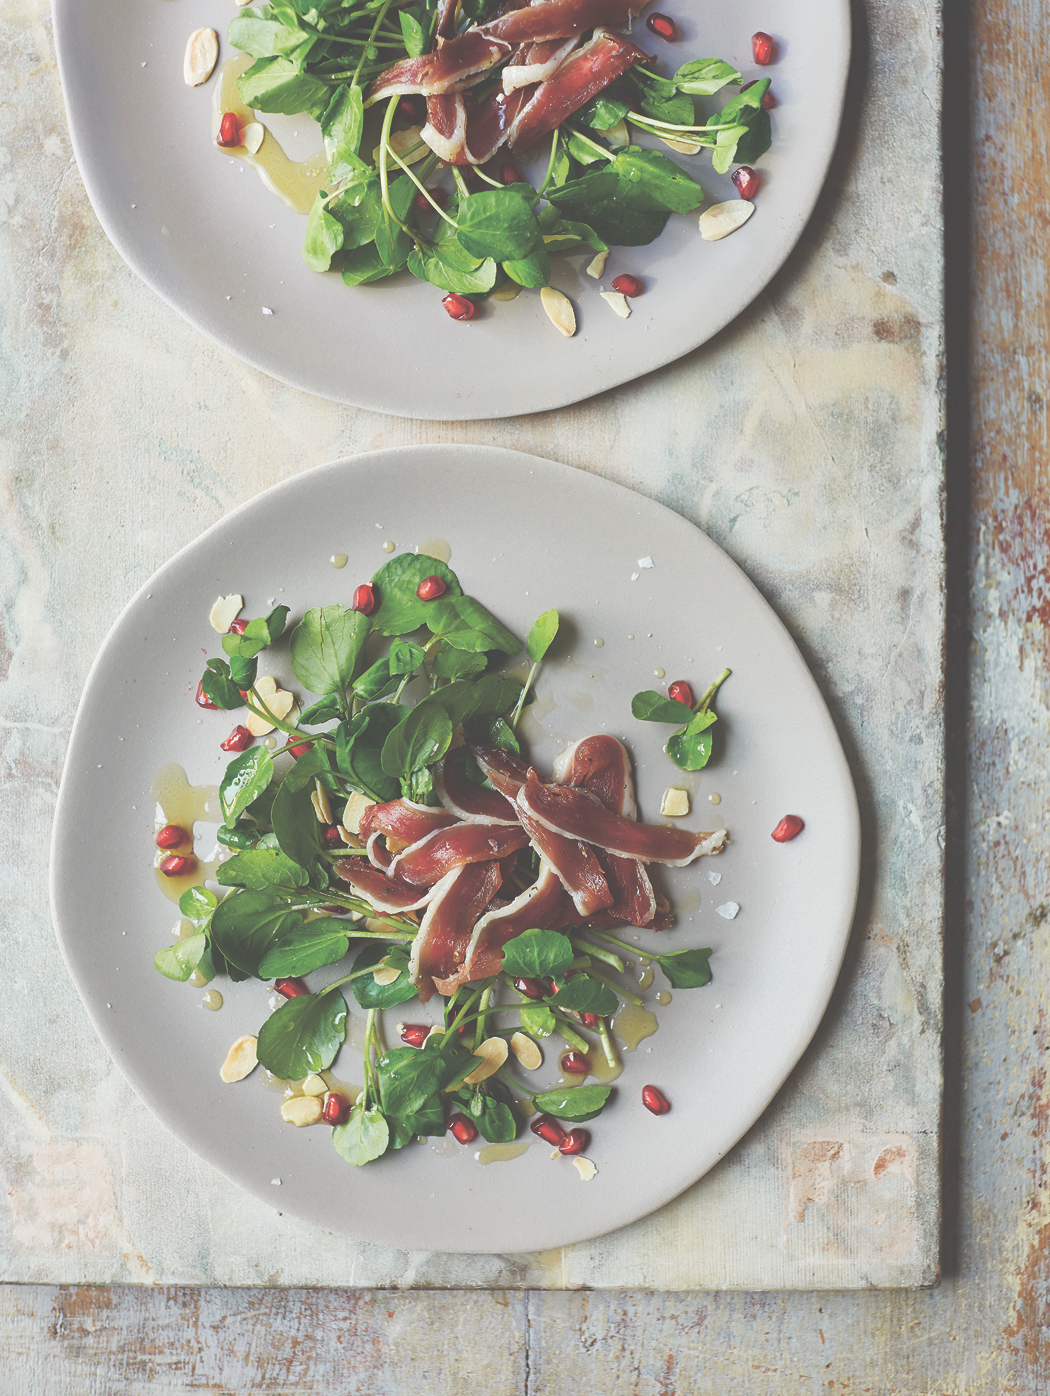 Recipe for Home-cured duck ham with pomegranate salad, from Basque cookbook